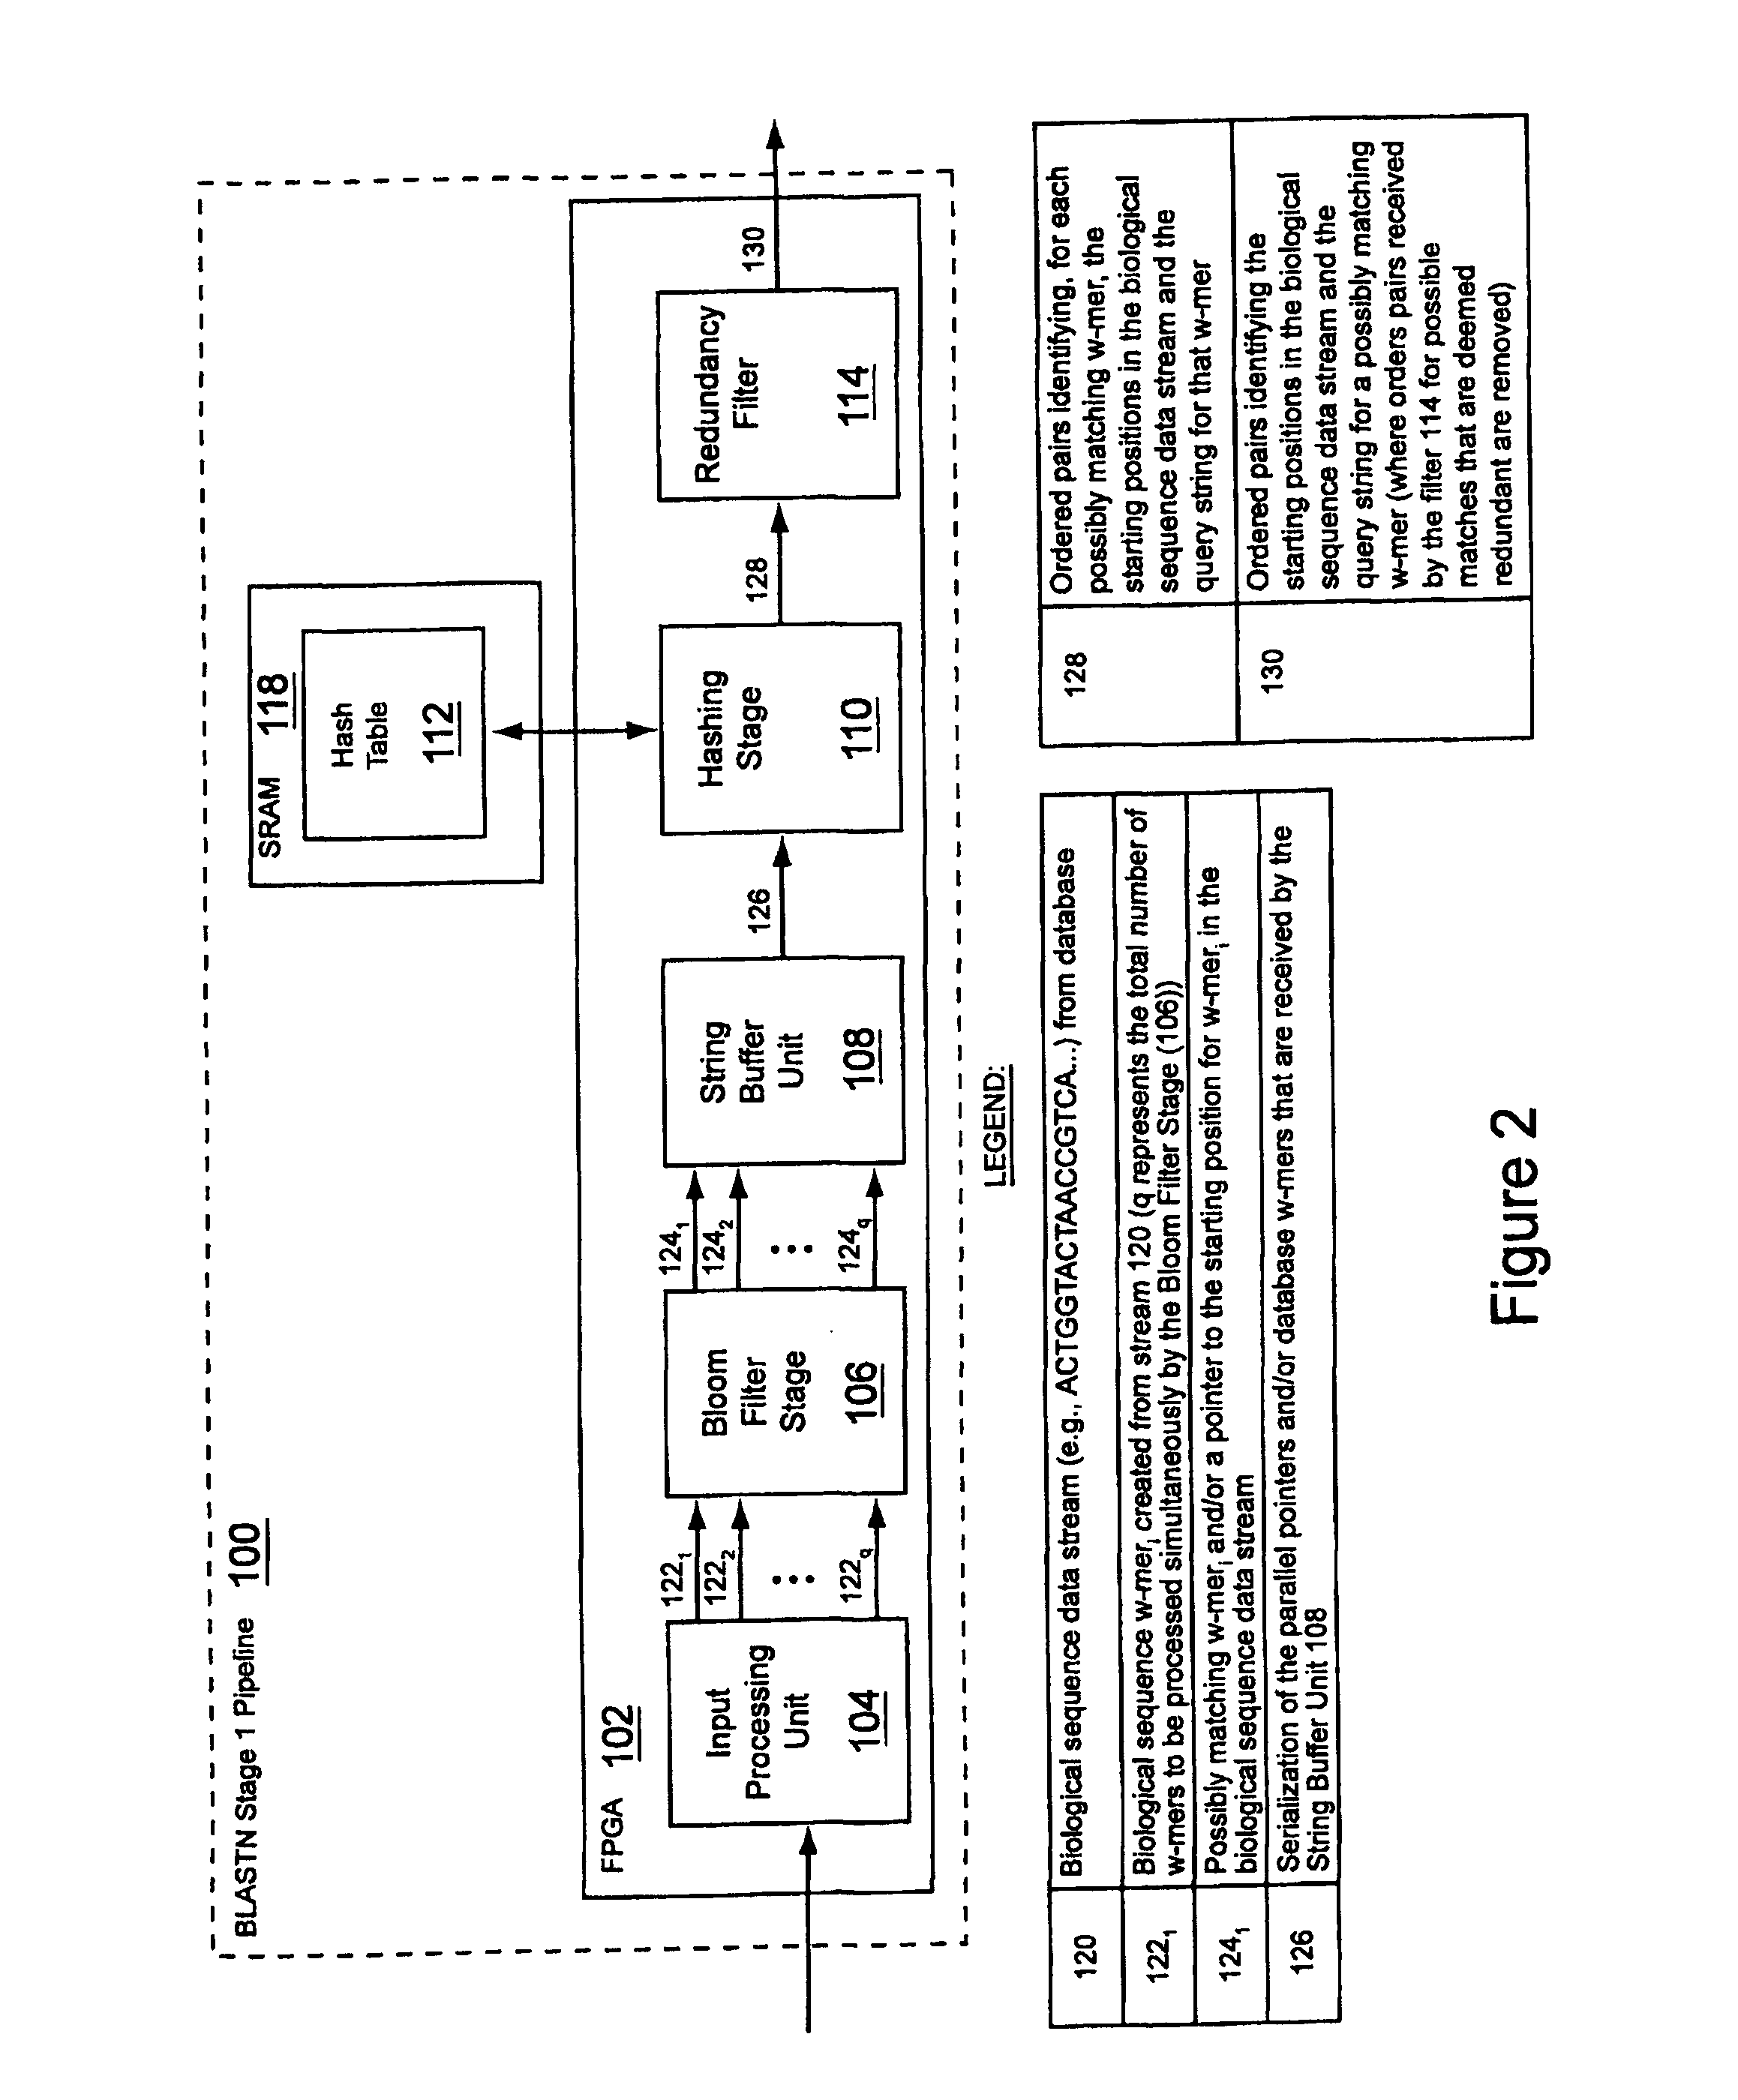 Method and apparatus for performing biosequence similarity searching